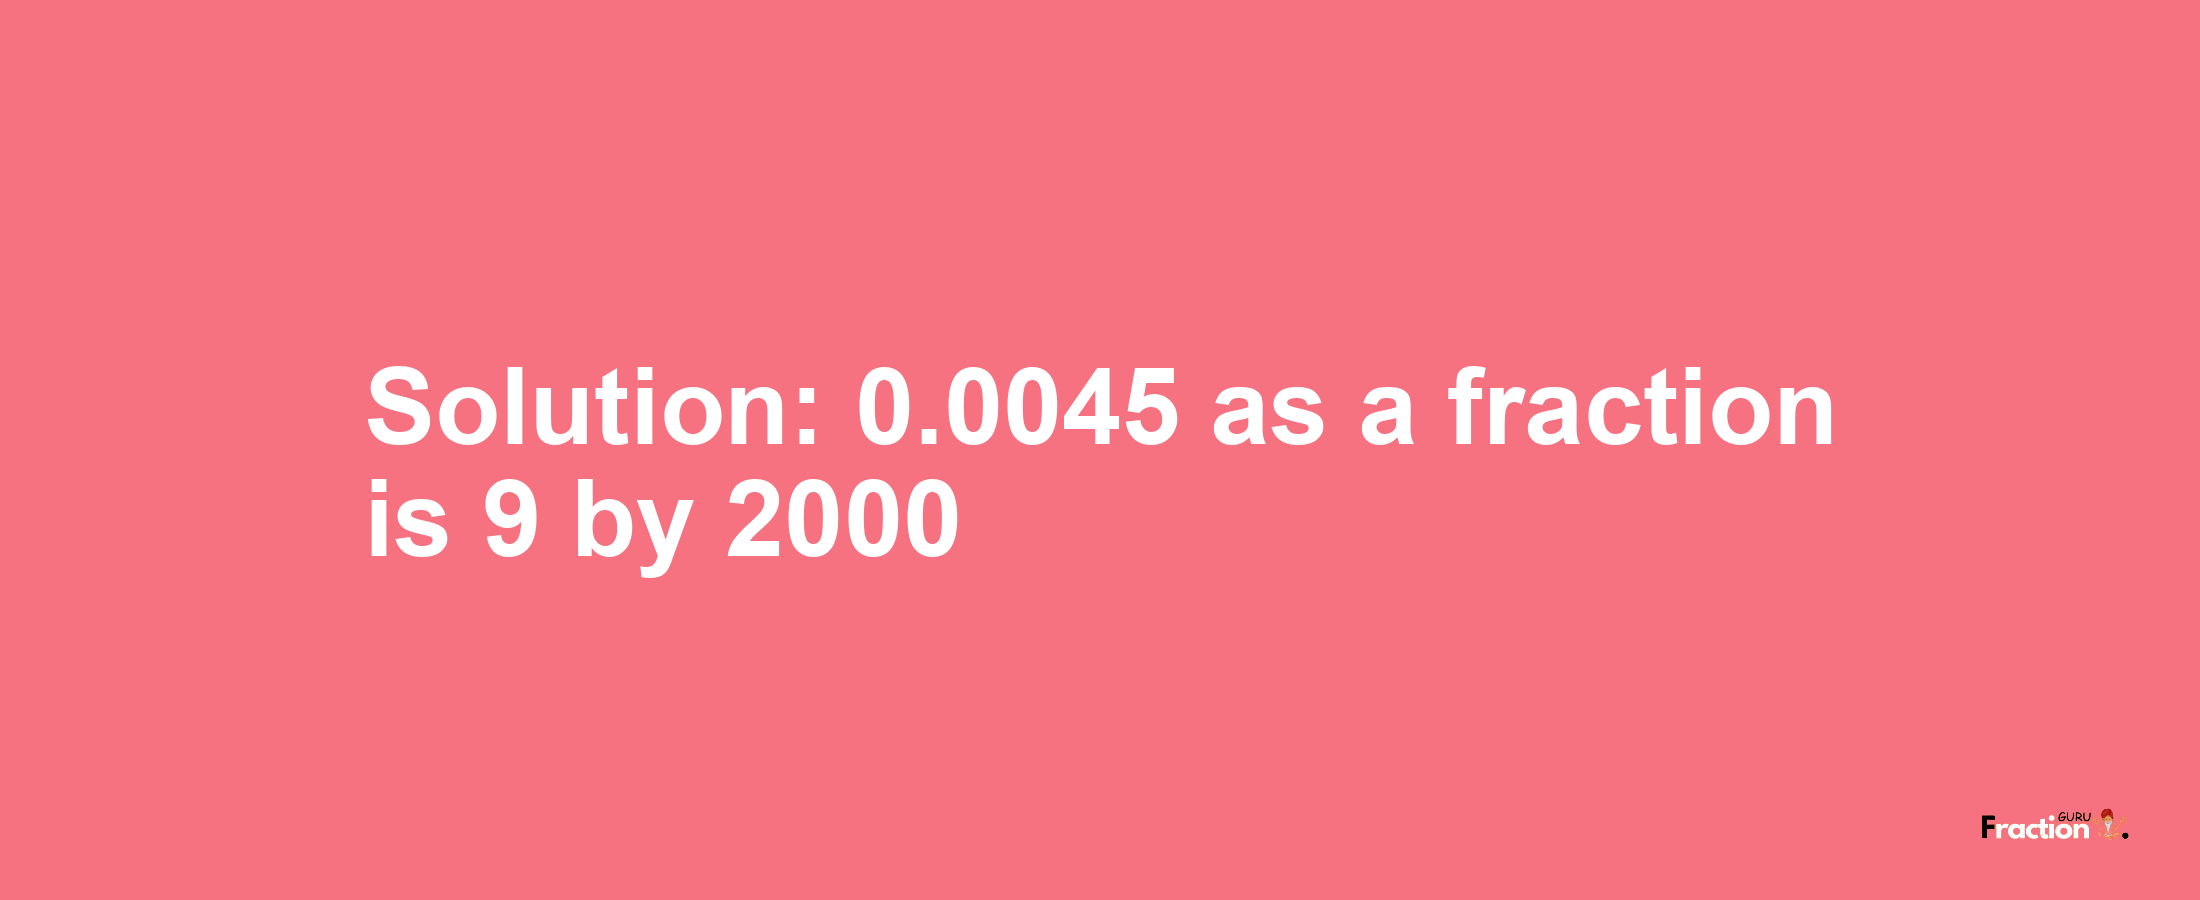 Solution:0.0045 as a fraction is 9/2000